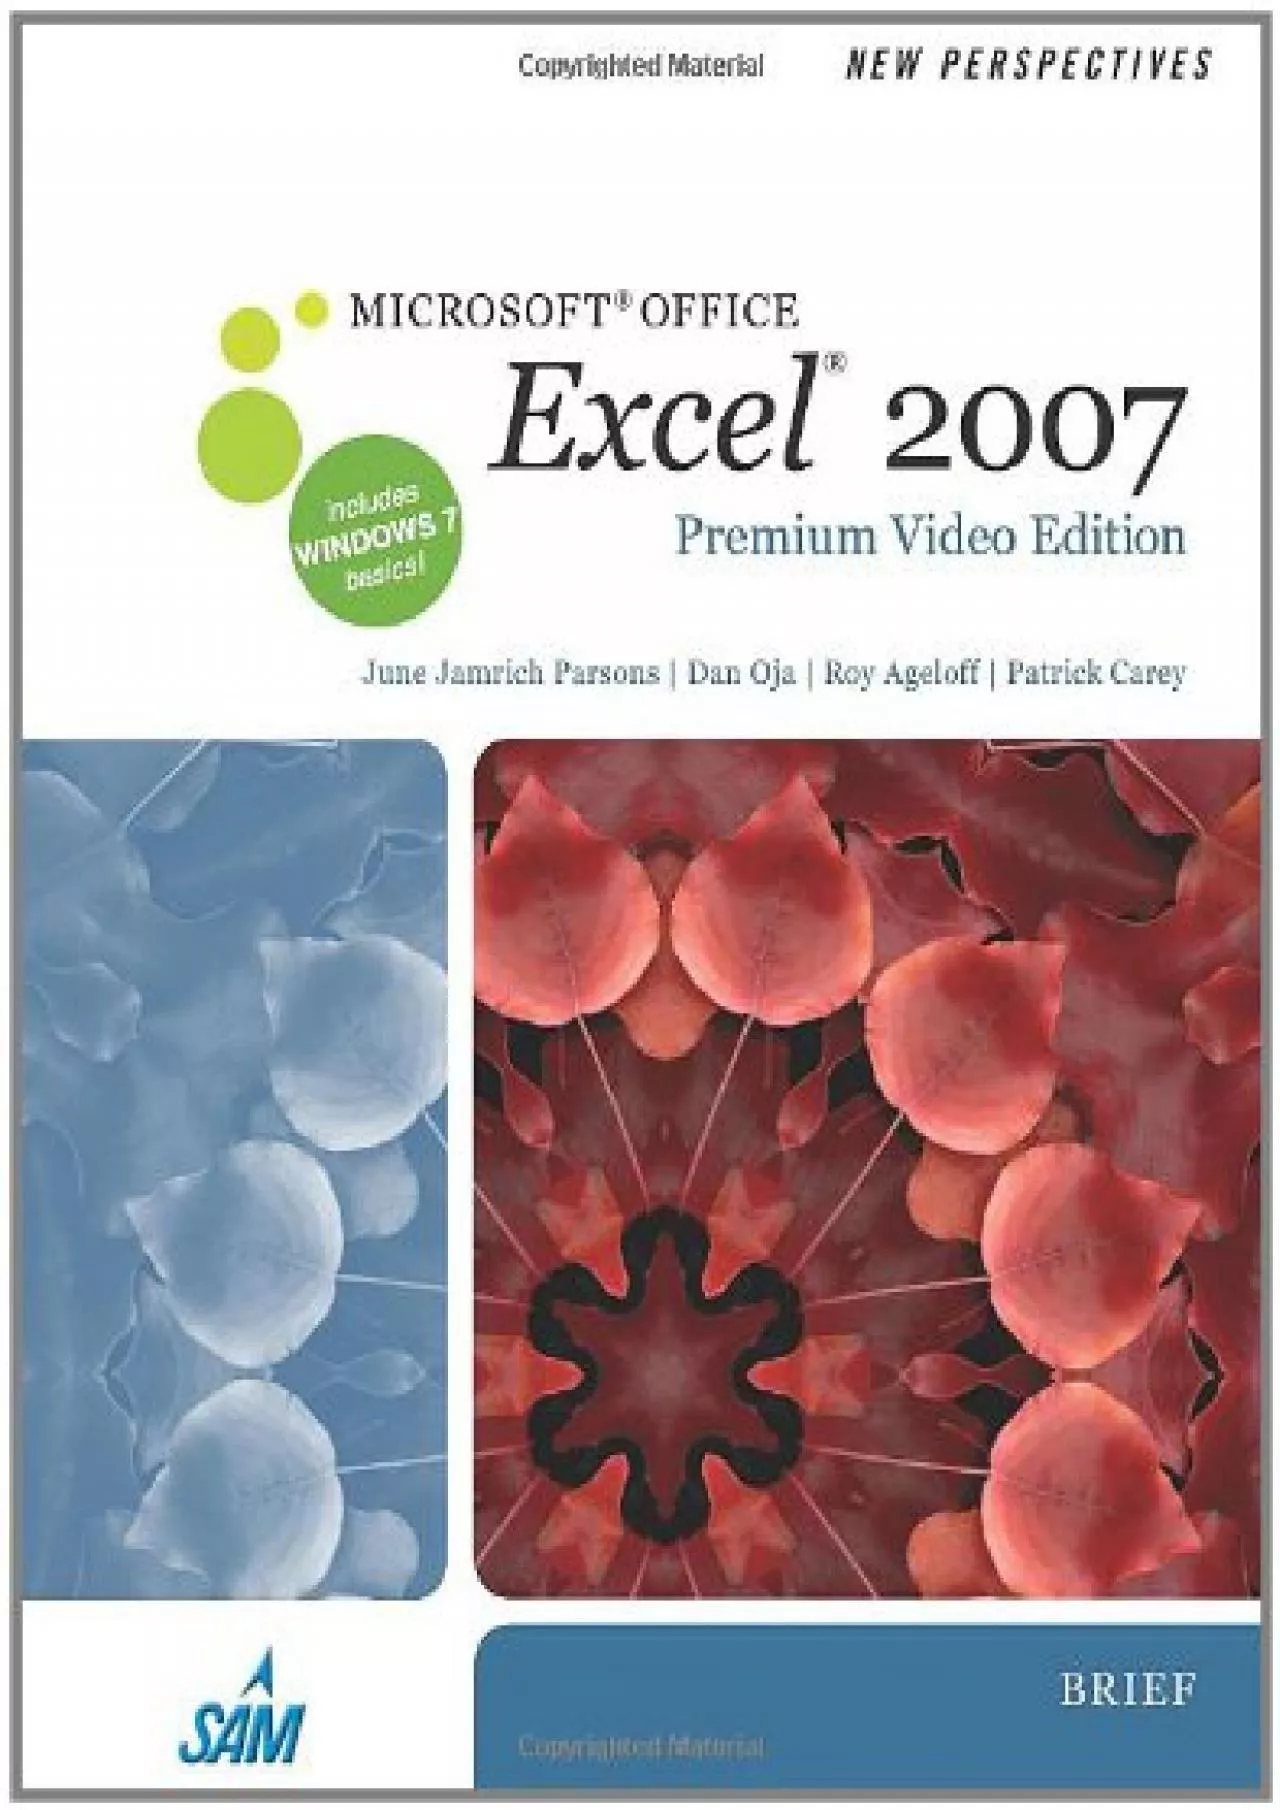 (DOWNLOAD)-New Perspectives on Microsoft Office Excel 2007, Brief, Premium Video Edition